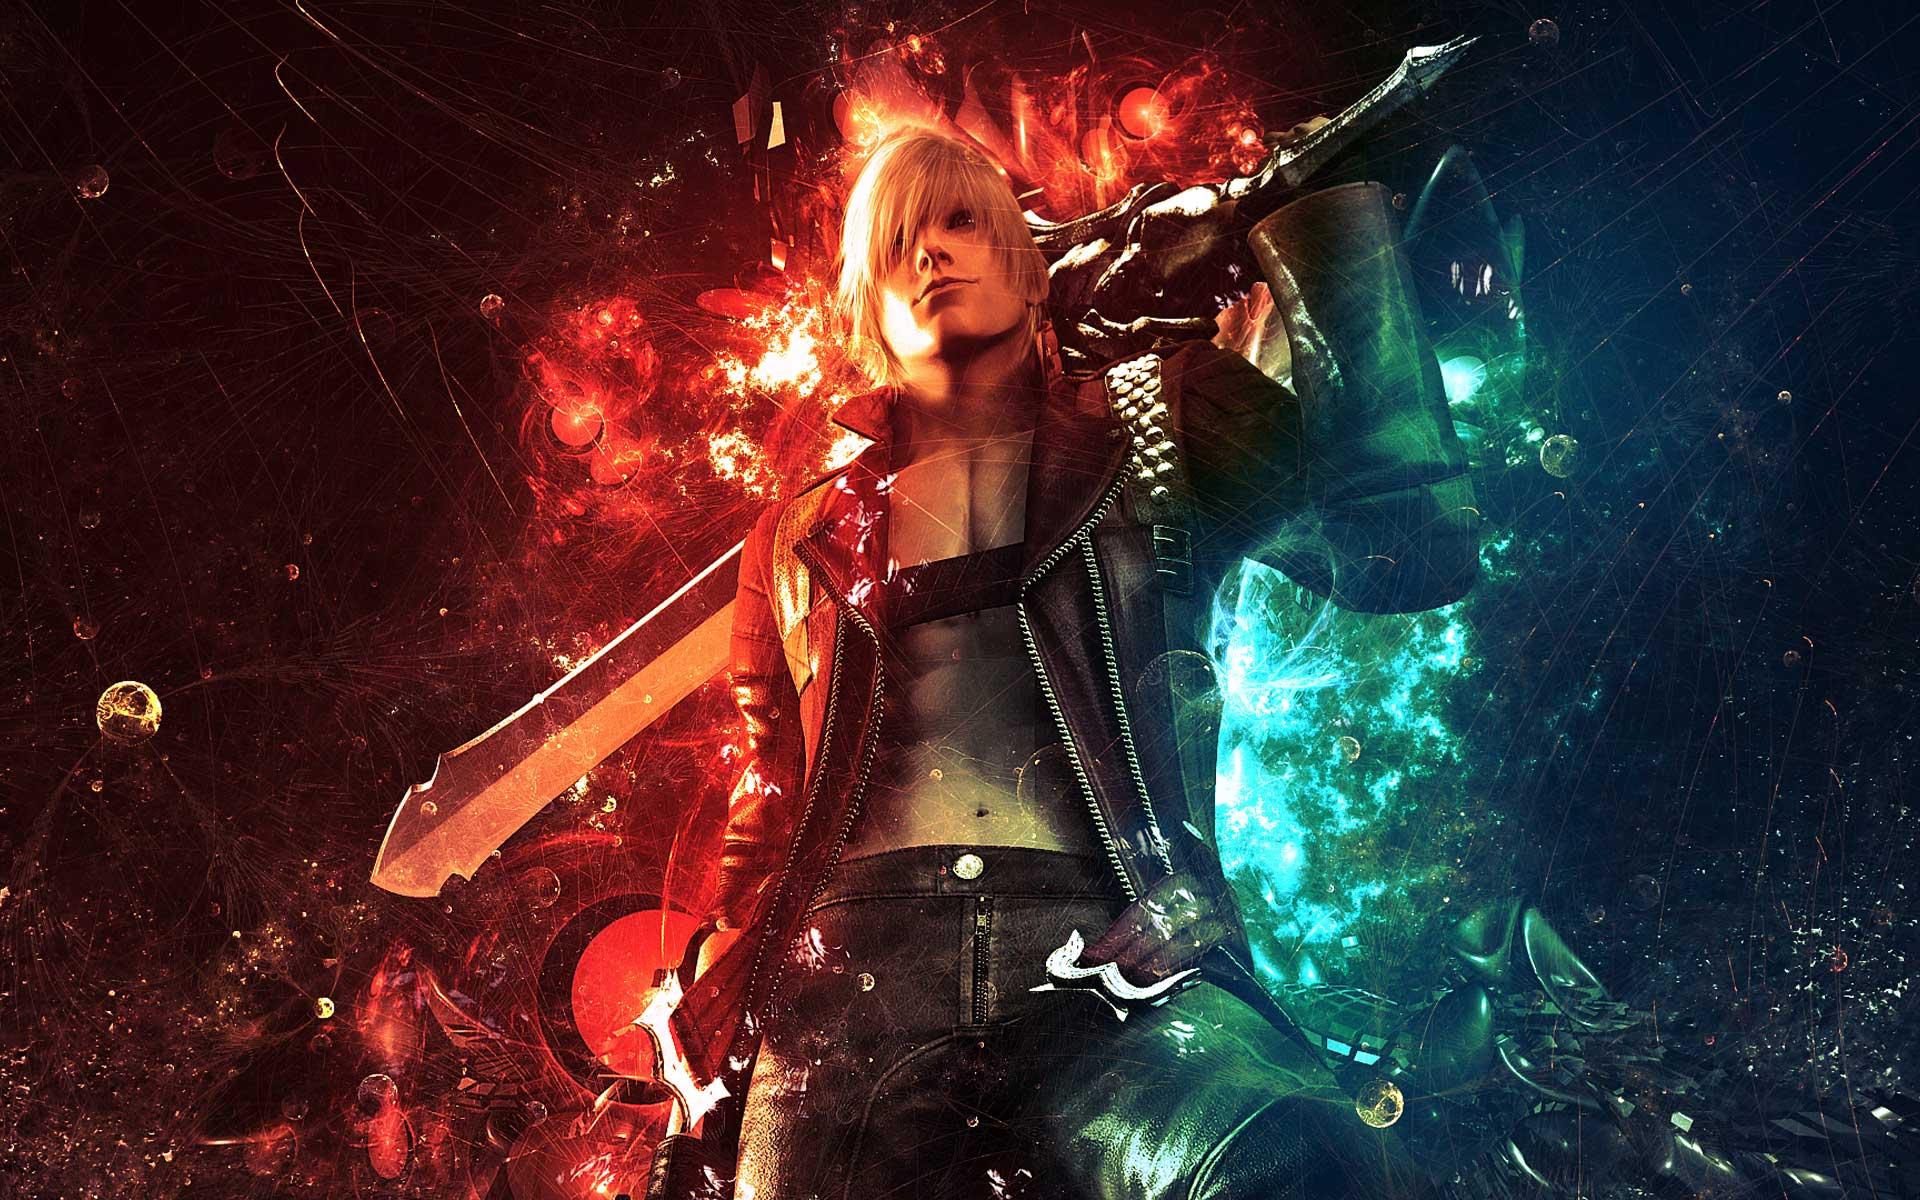 Devil May Cry 4 Dante Wallpaper Viewing Gallery | HD Wallpapers Range